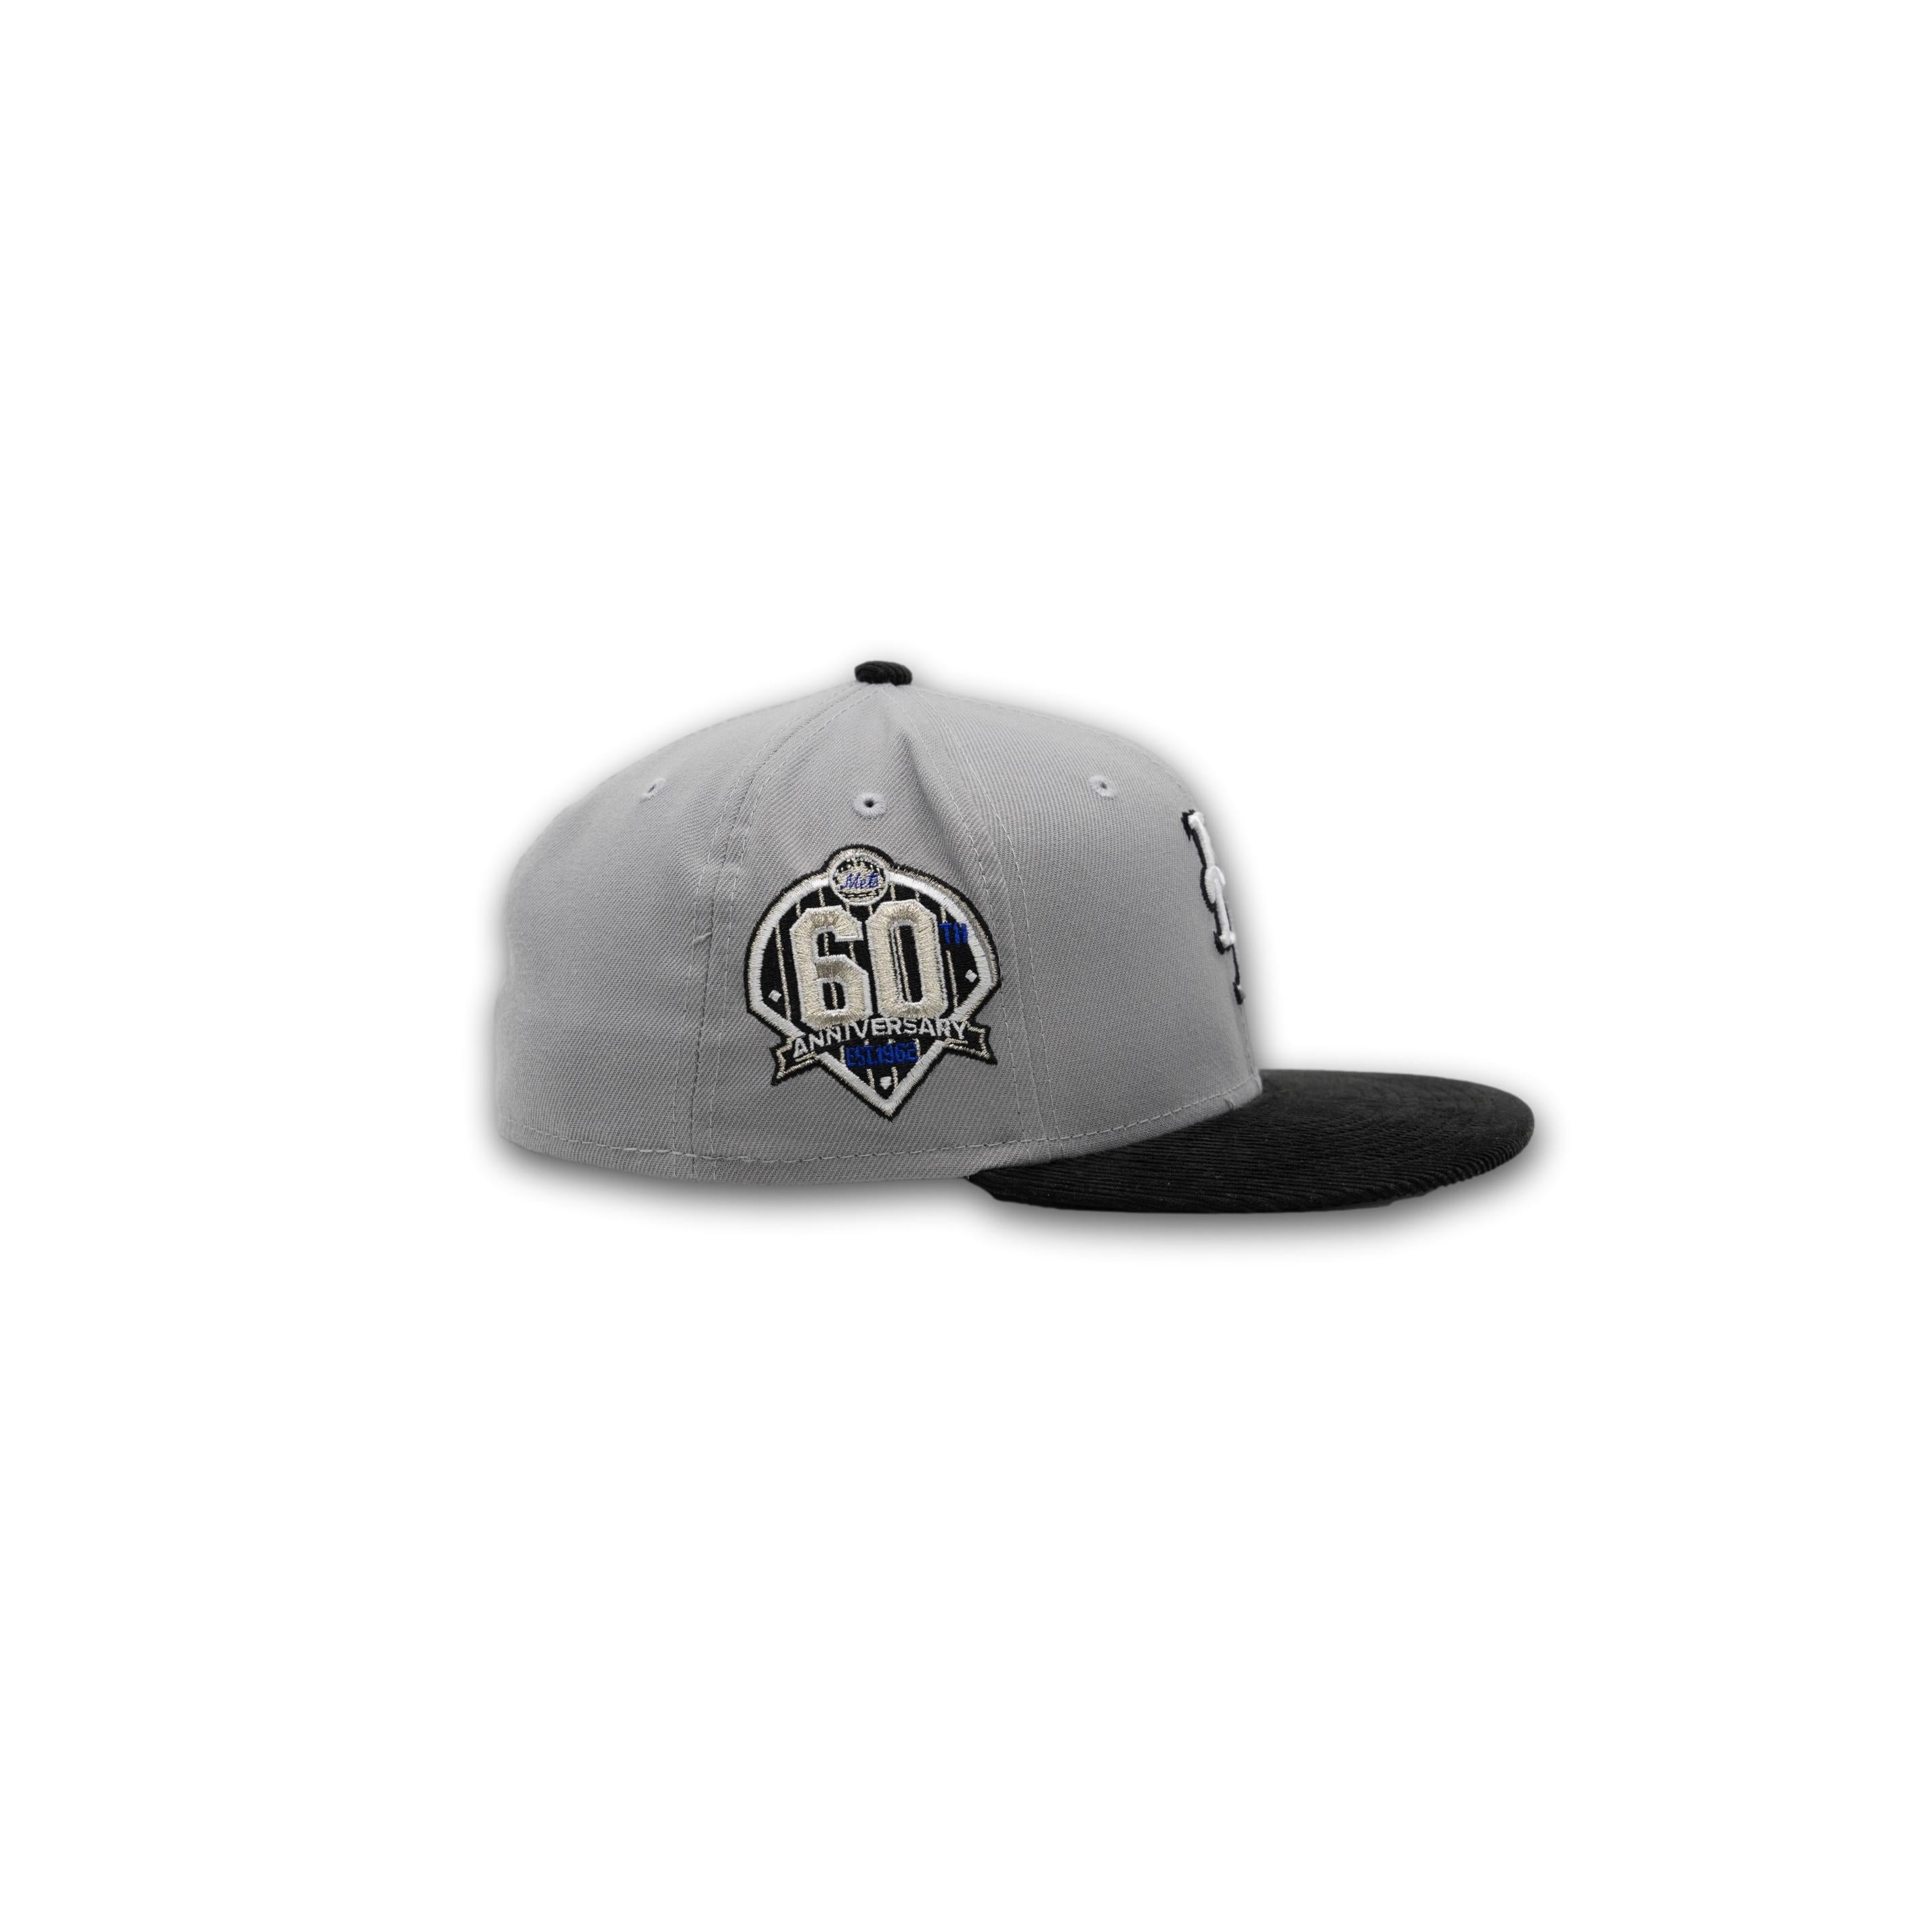 New Era New York Mets 60th Anniversary Patch Fitted